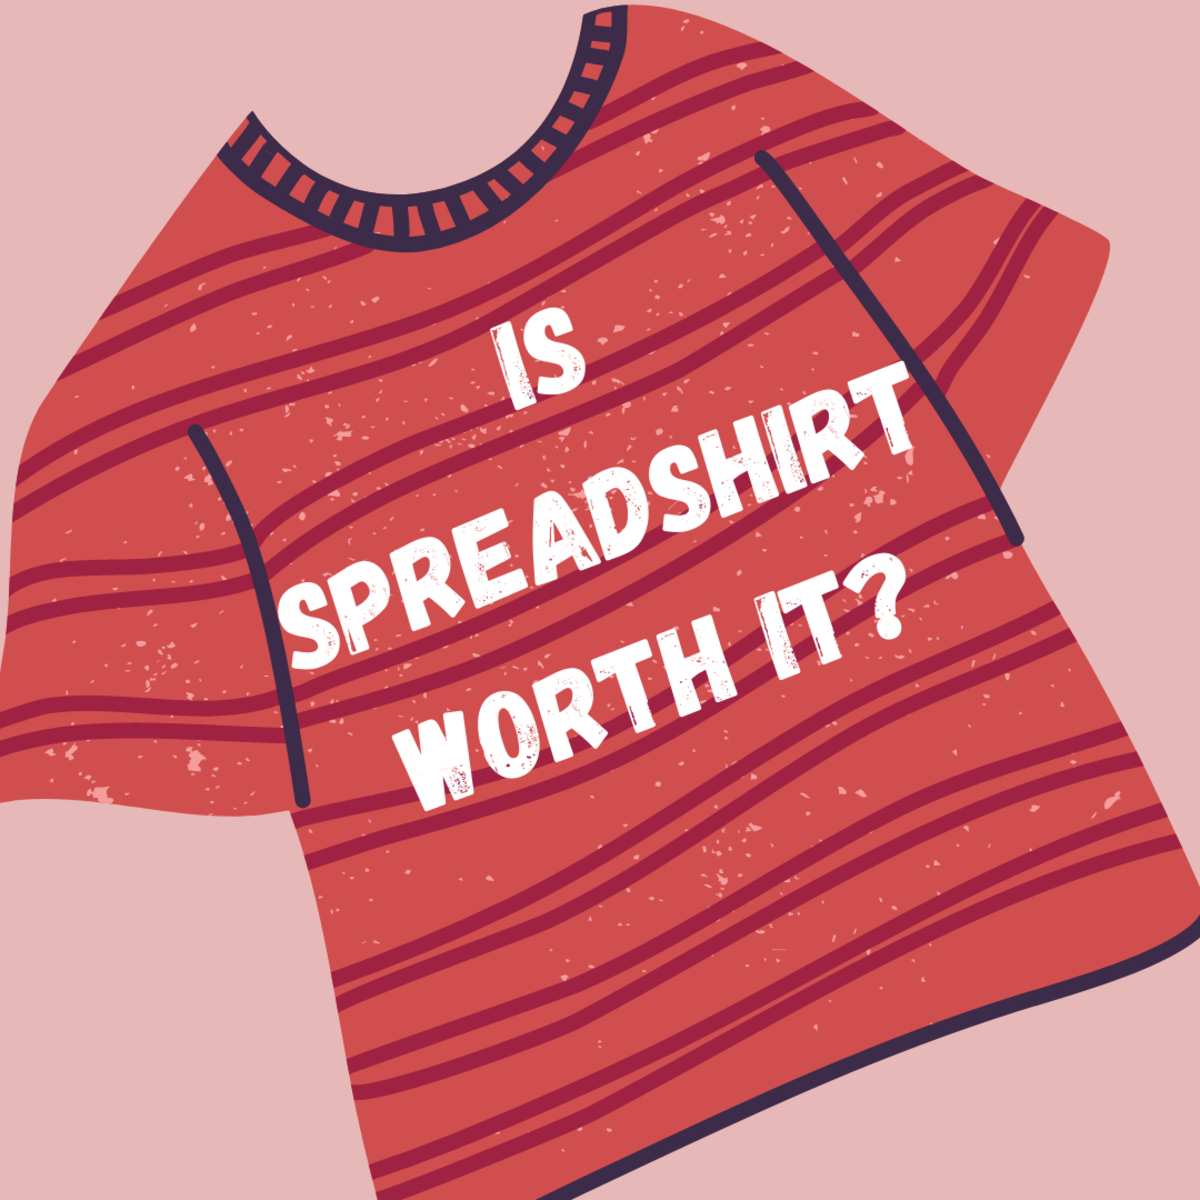 Read my review of Spreadshirt and whether it's worth your time.